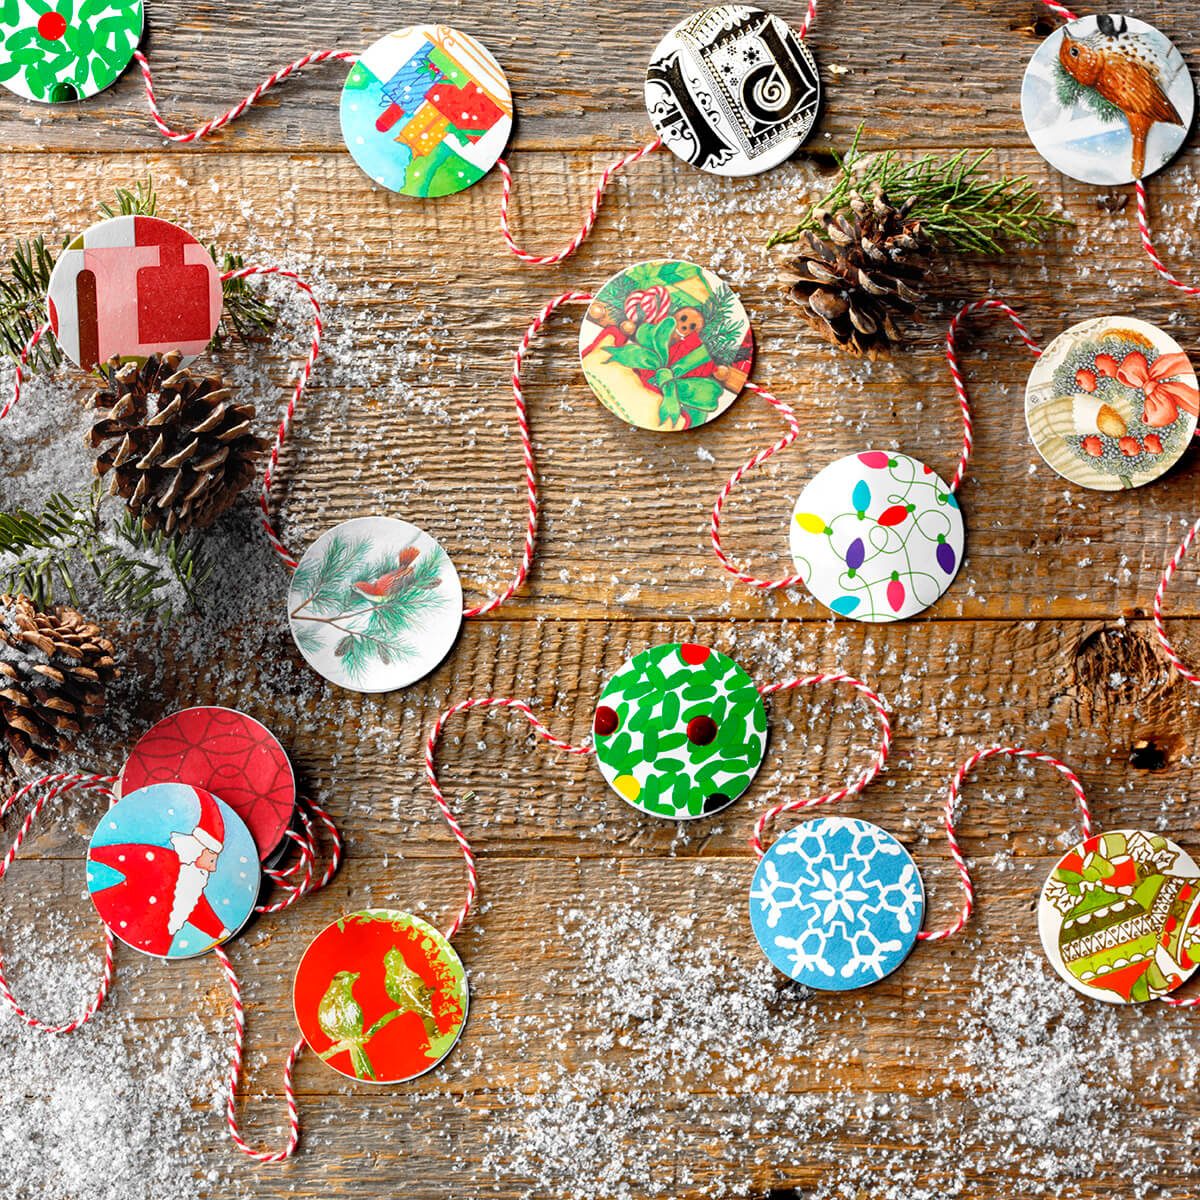 10 Christmas Card Crafts to Make With Last Year's Cards